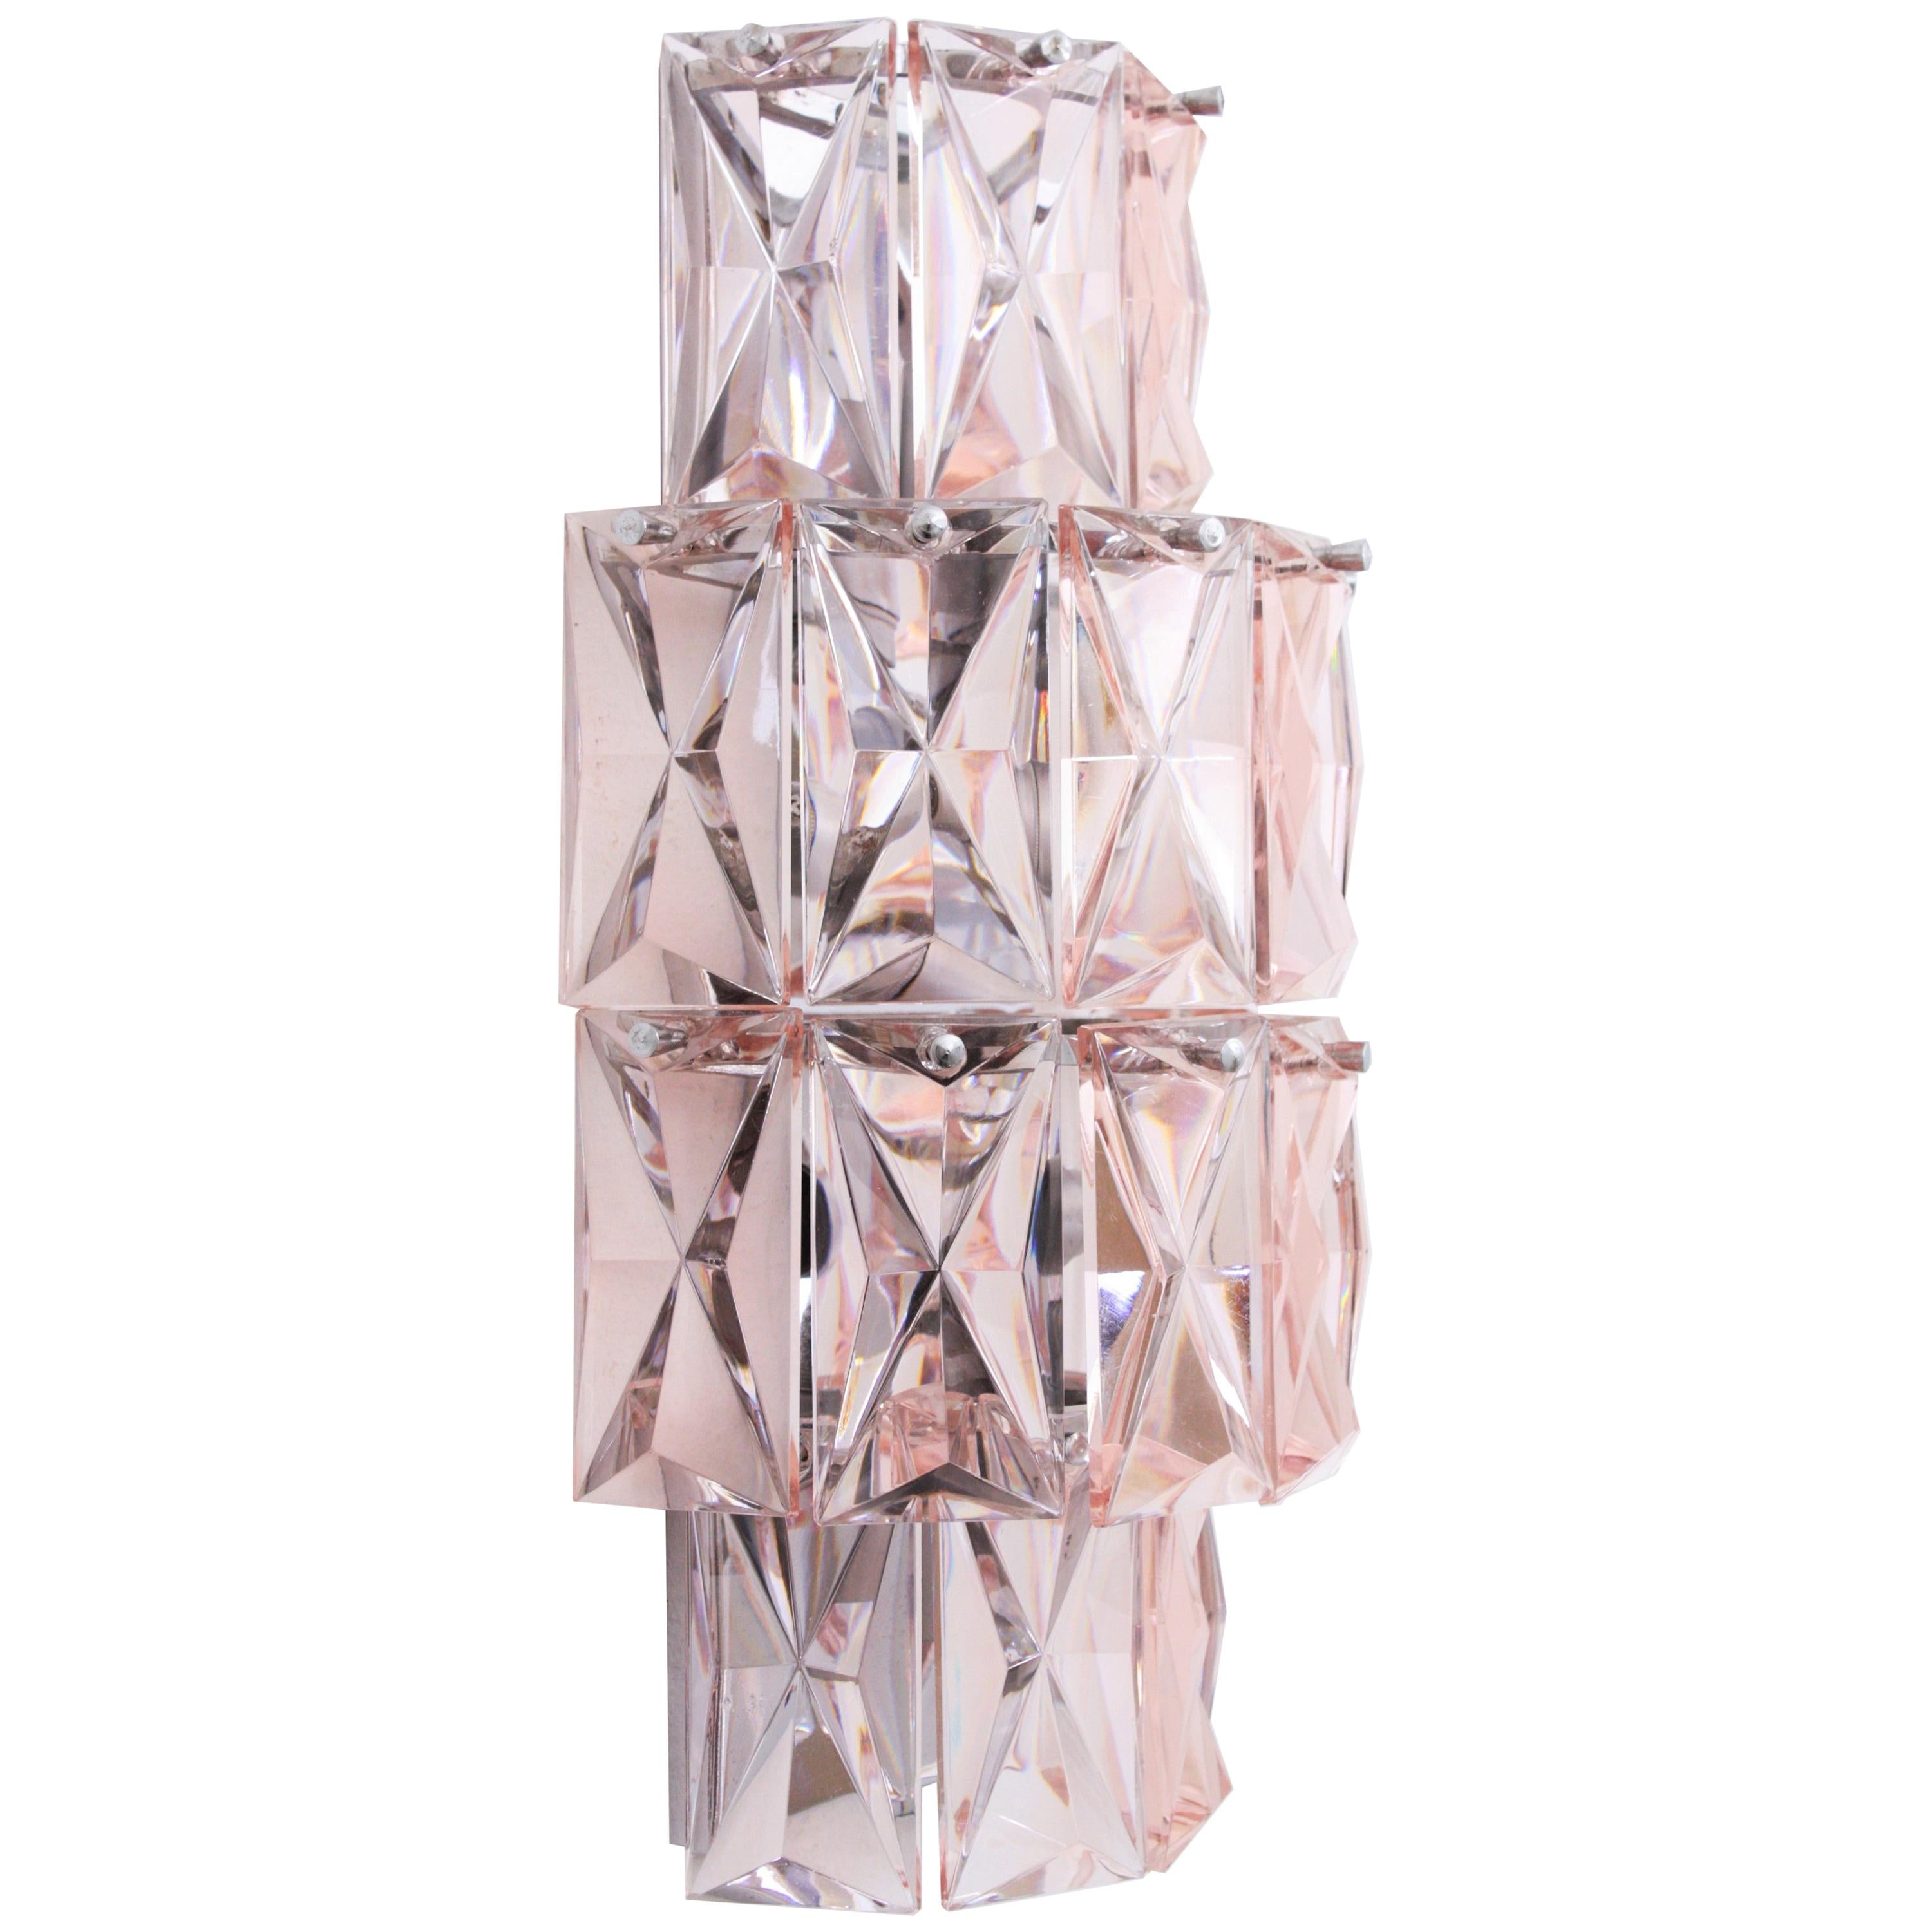 Baccarat Pink Crystal Wall Sconce, Mid-Century Modern Period For Sale